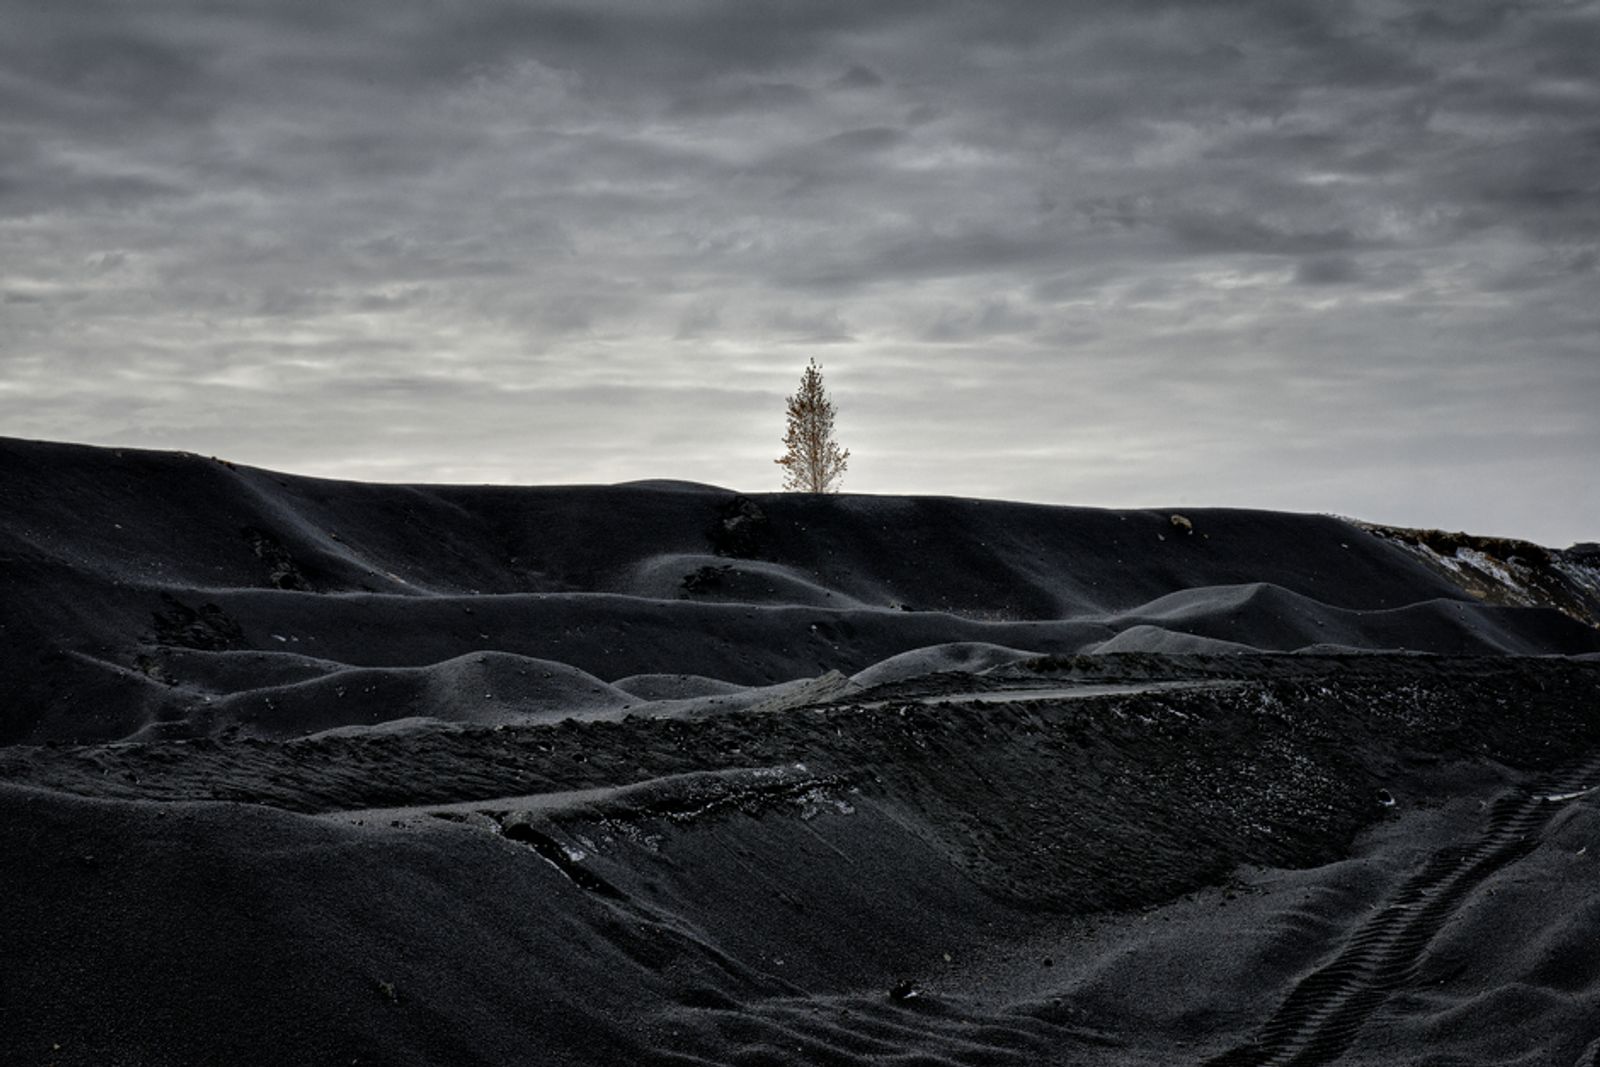 © Pierpaolo Mittica - Image from the Karabash, at the end of the world photography project